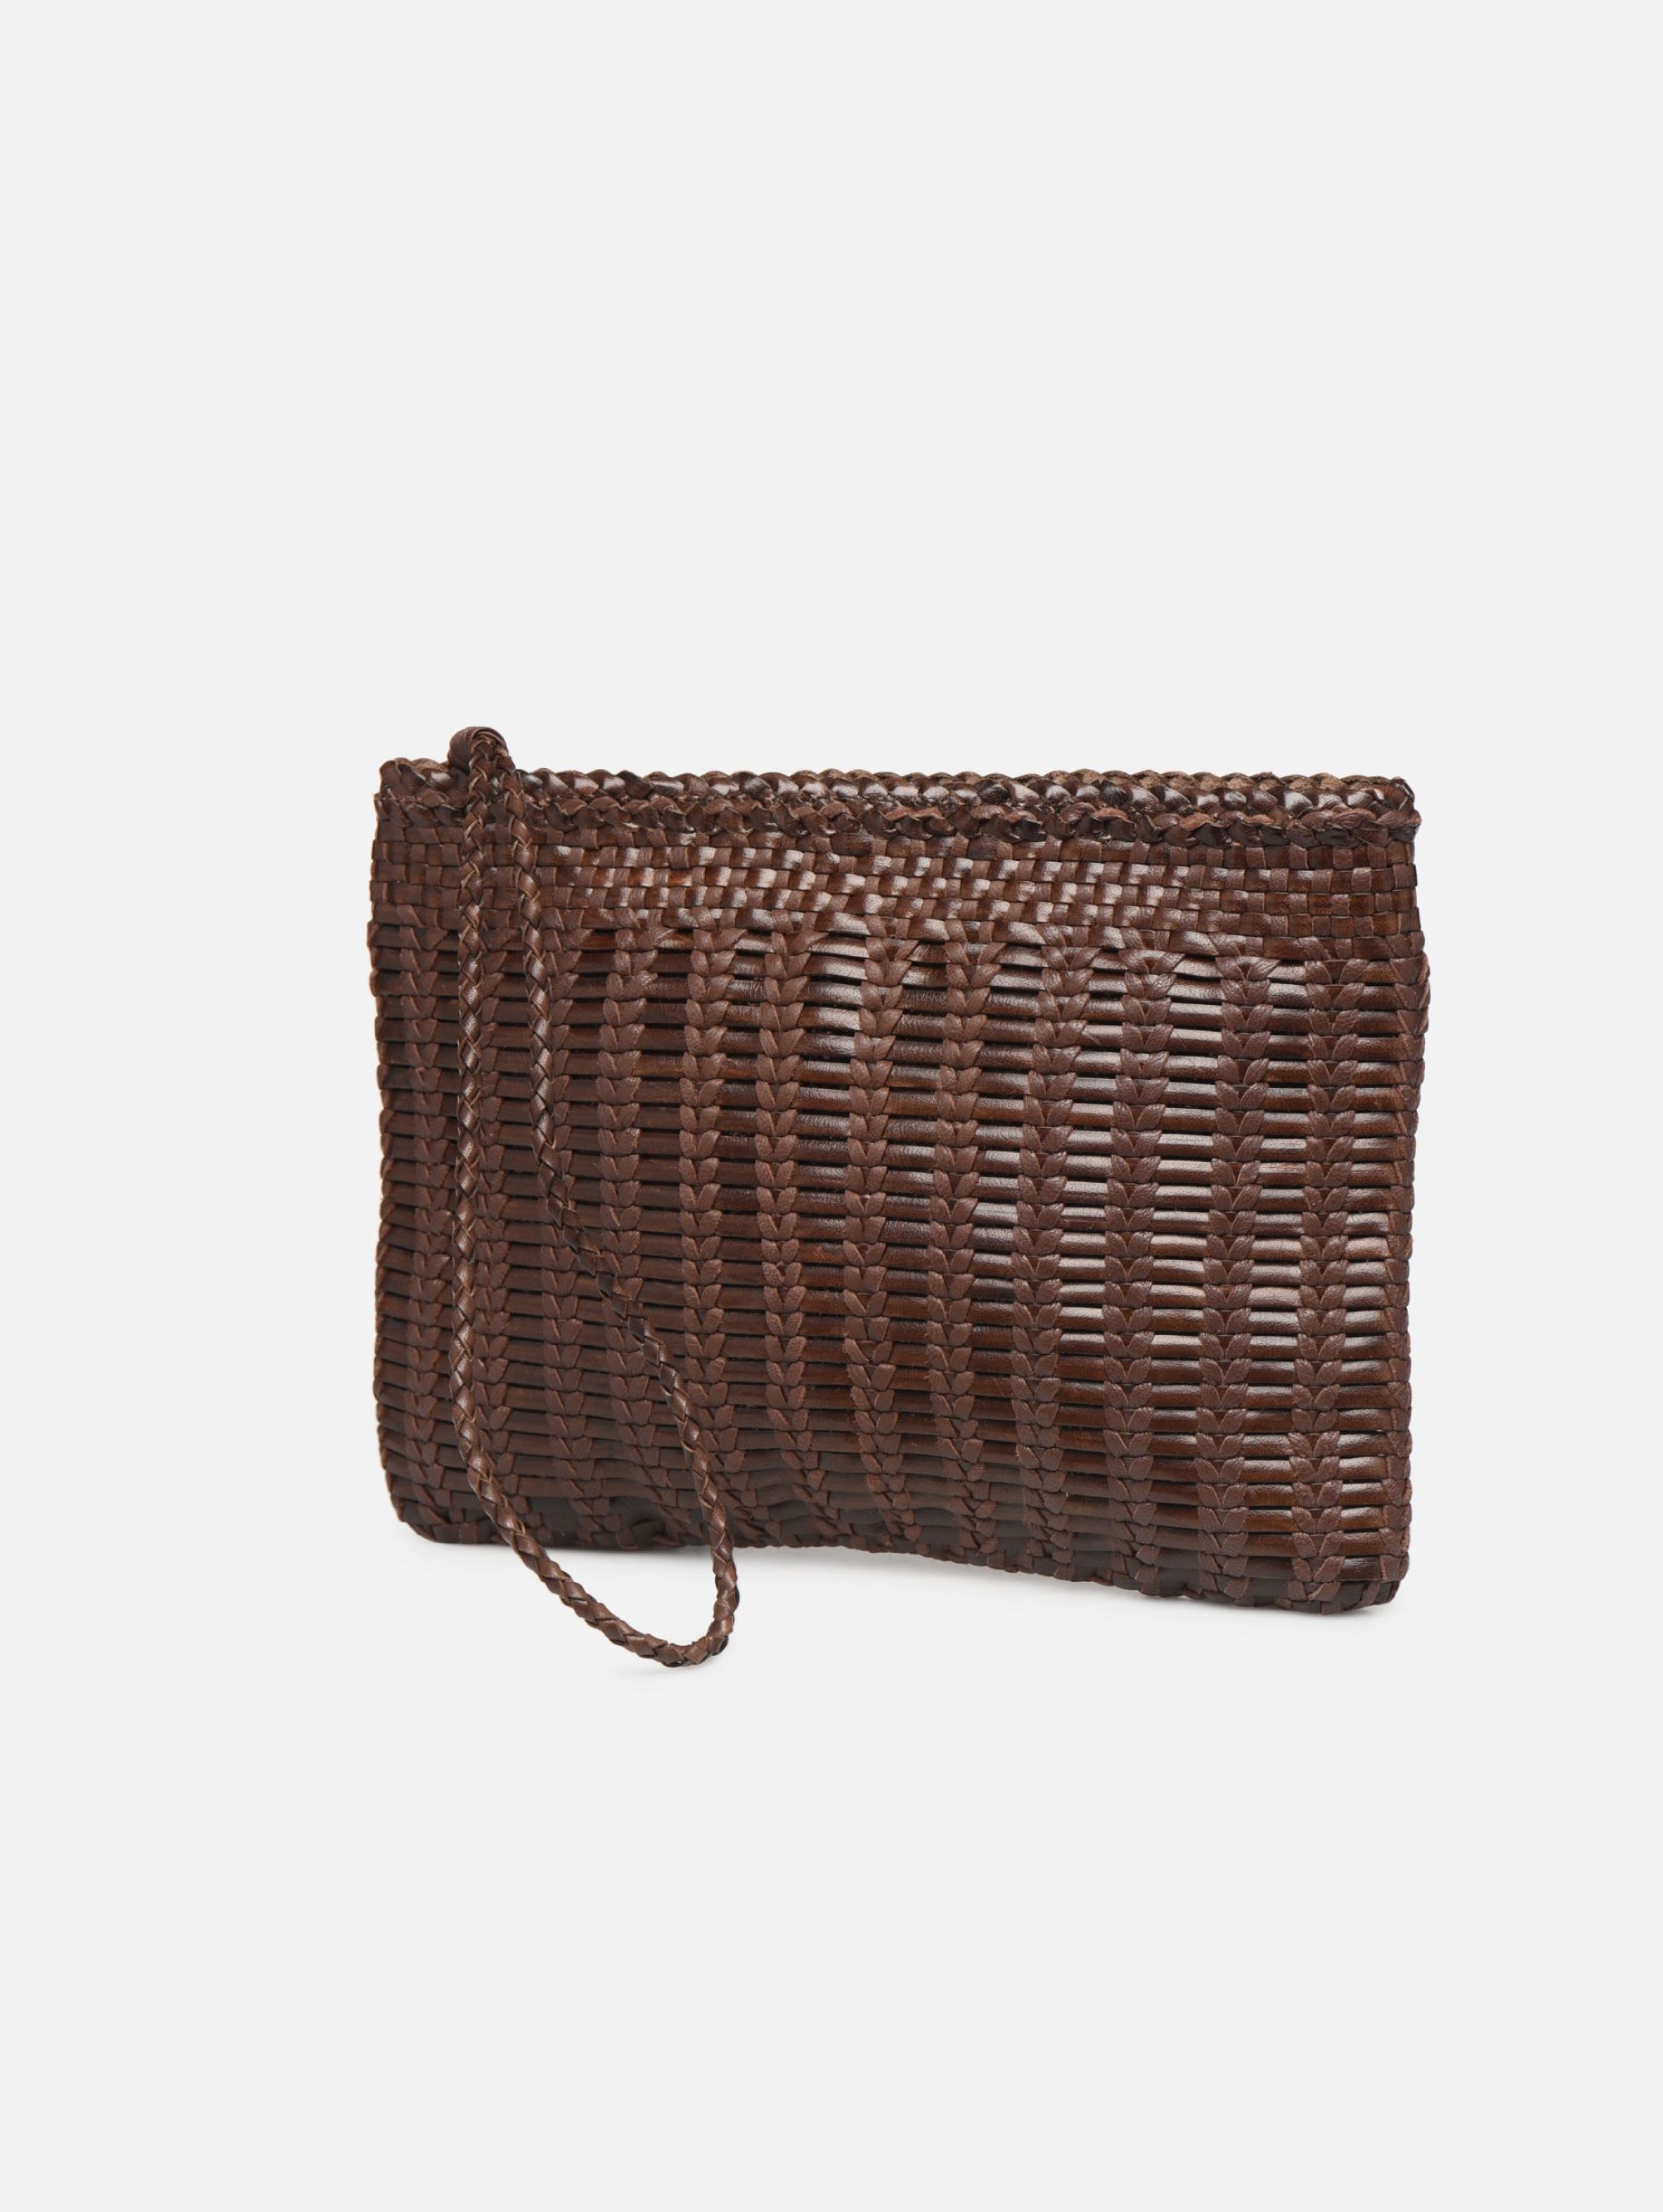 Bali Large Brown Woven Leather Clutch